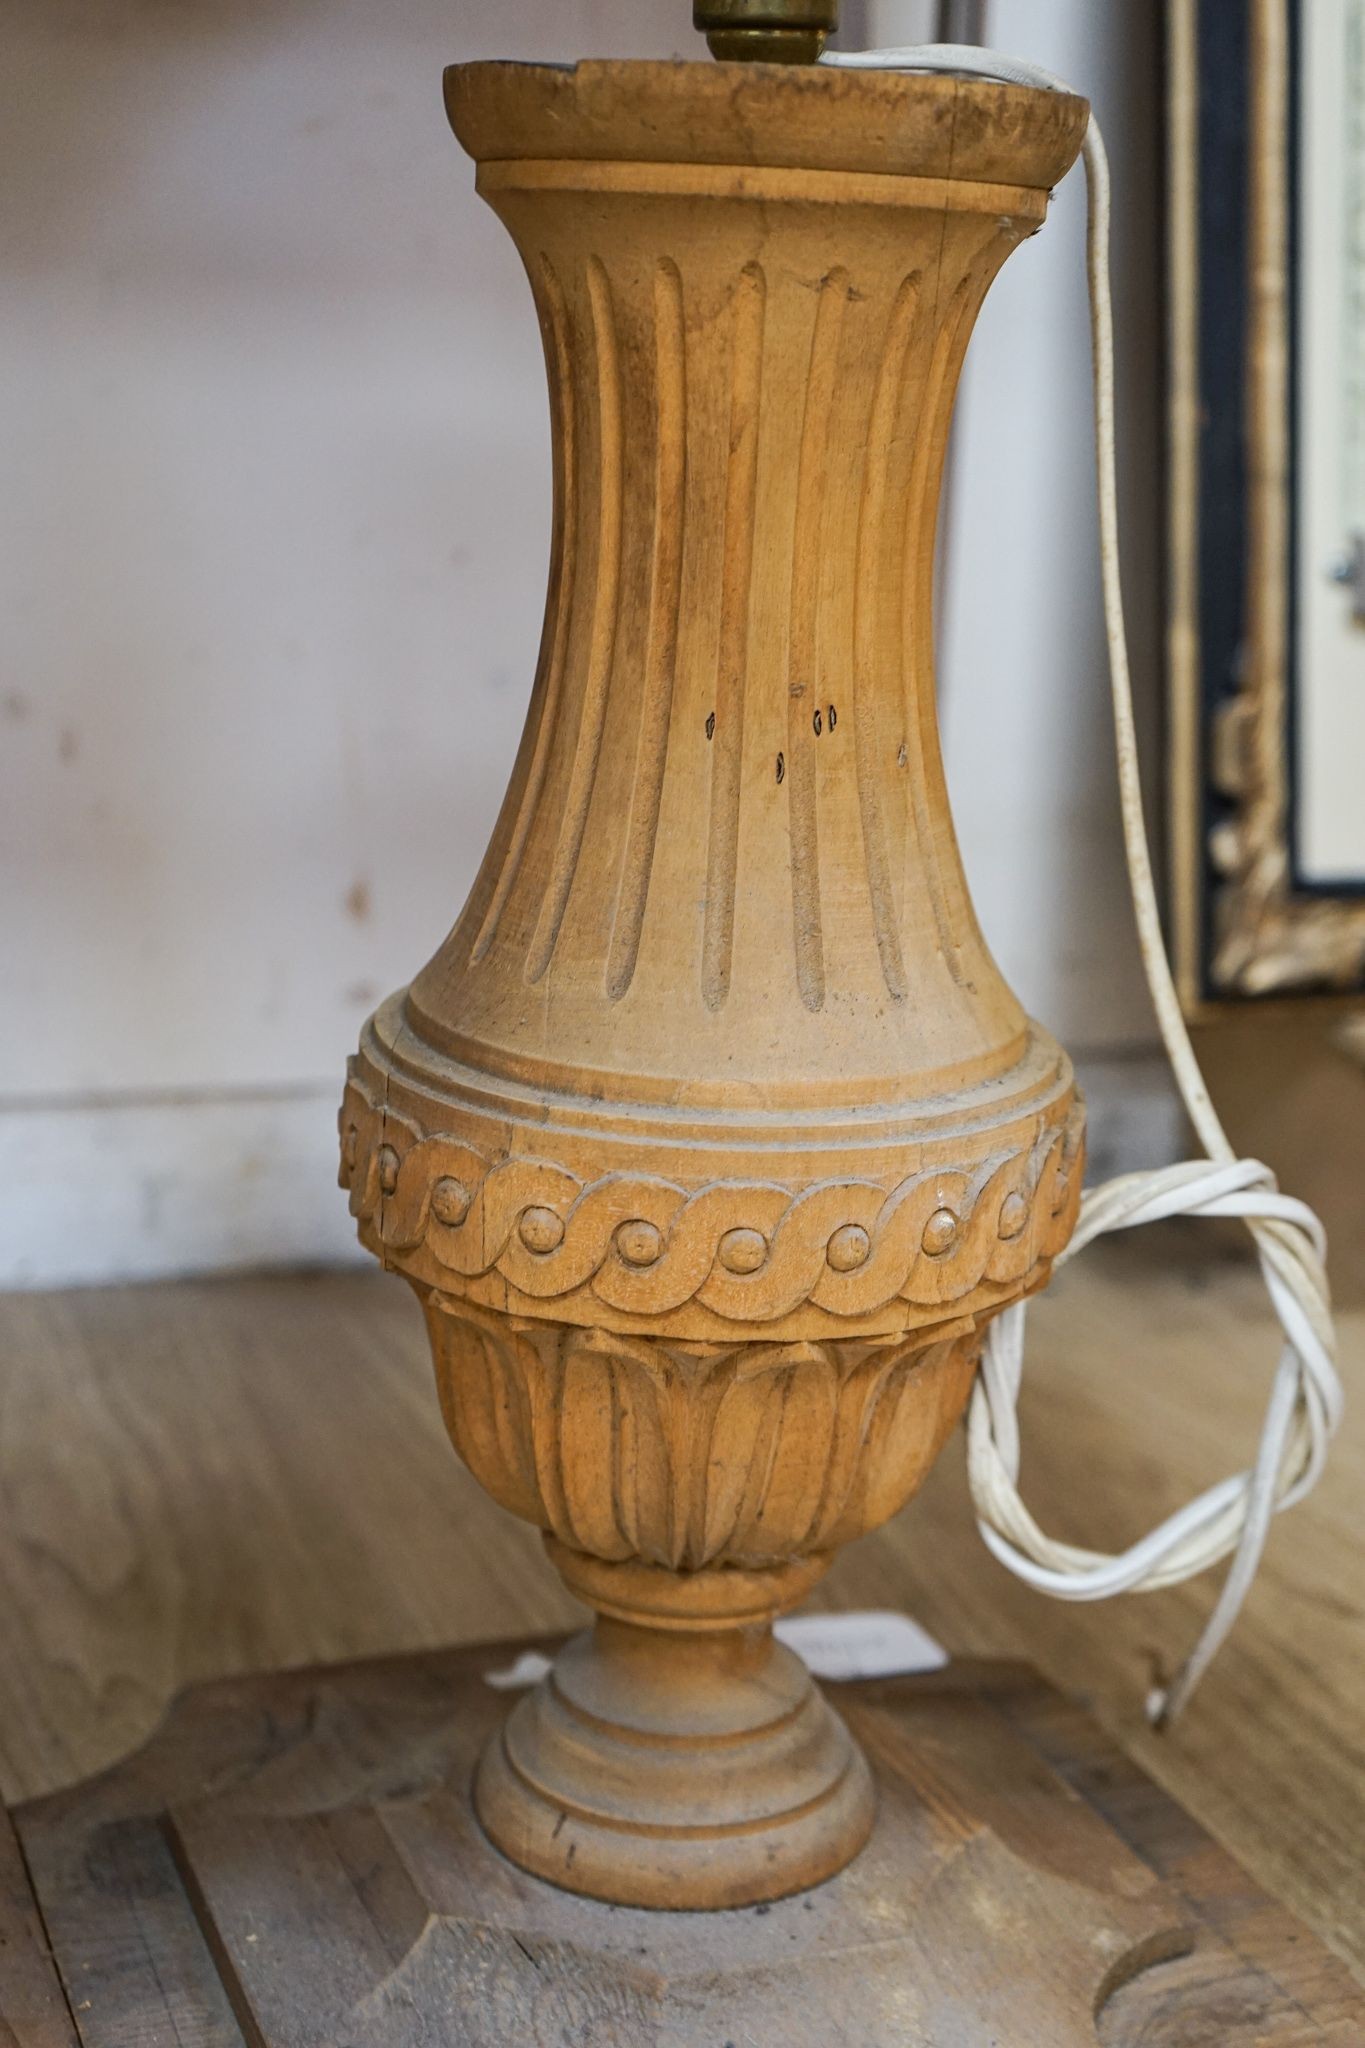 A pair of modern pine and beech carved classical vase form lamps, height 45cm